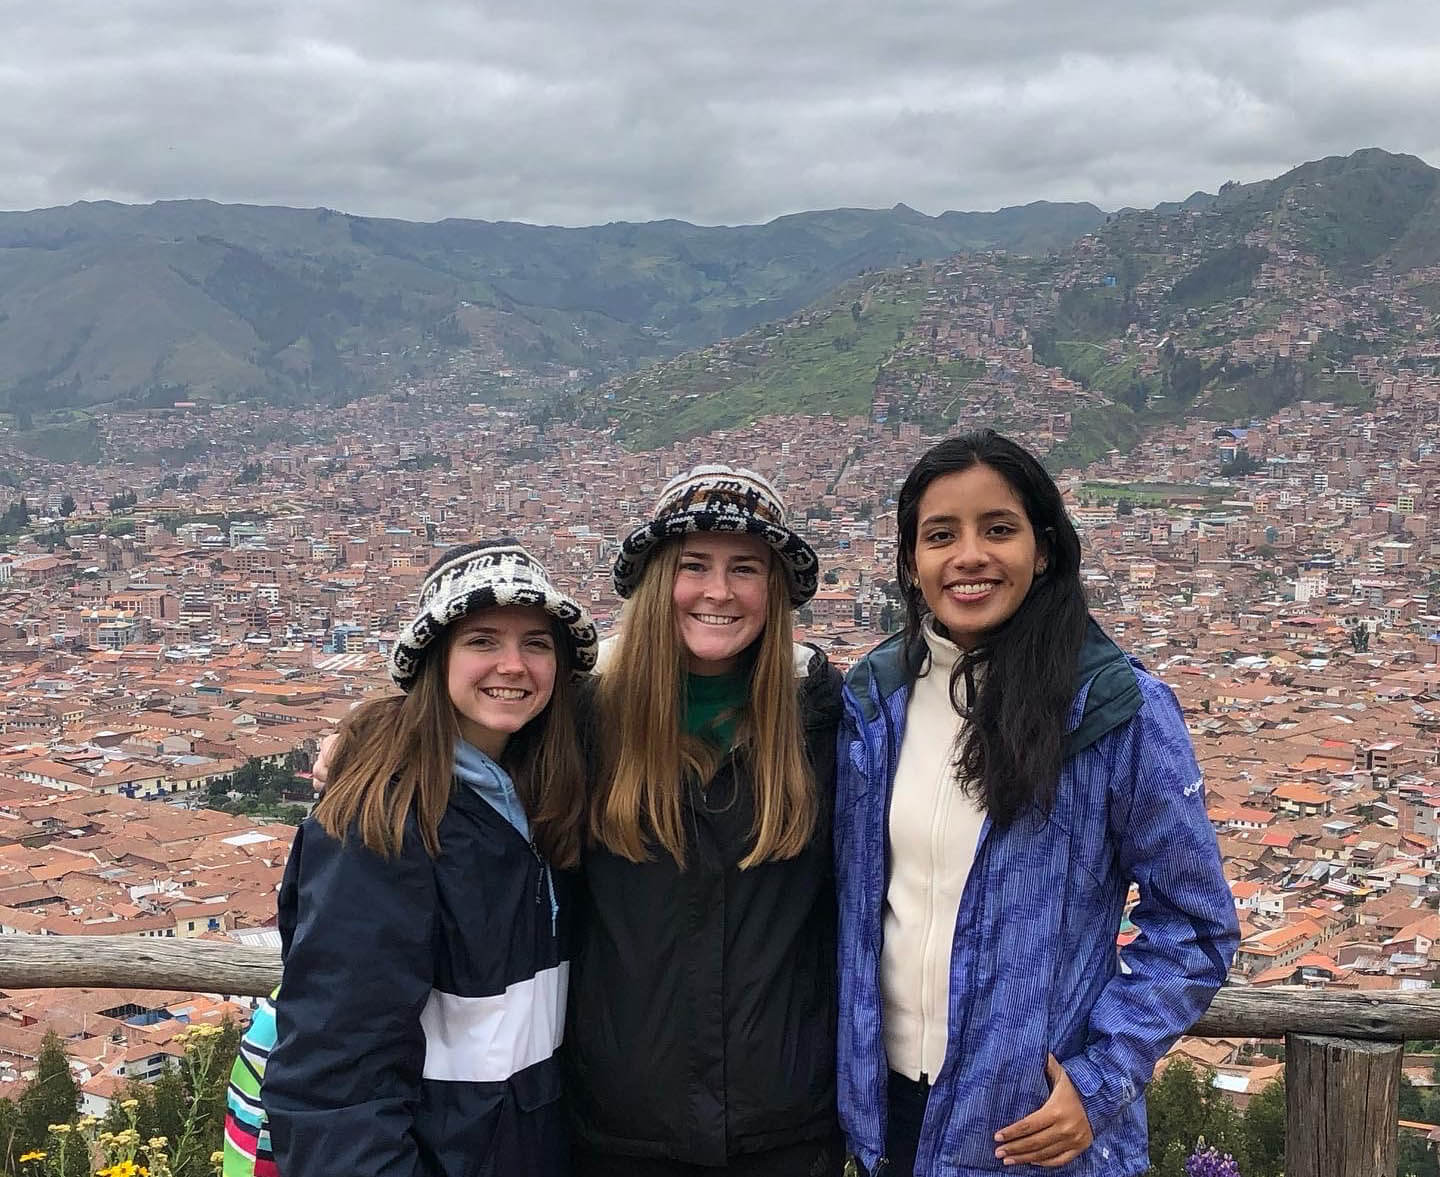 Image of three young women outdoors with the city on the back